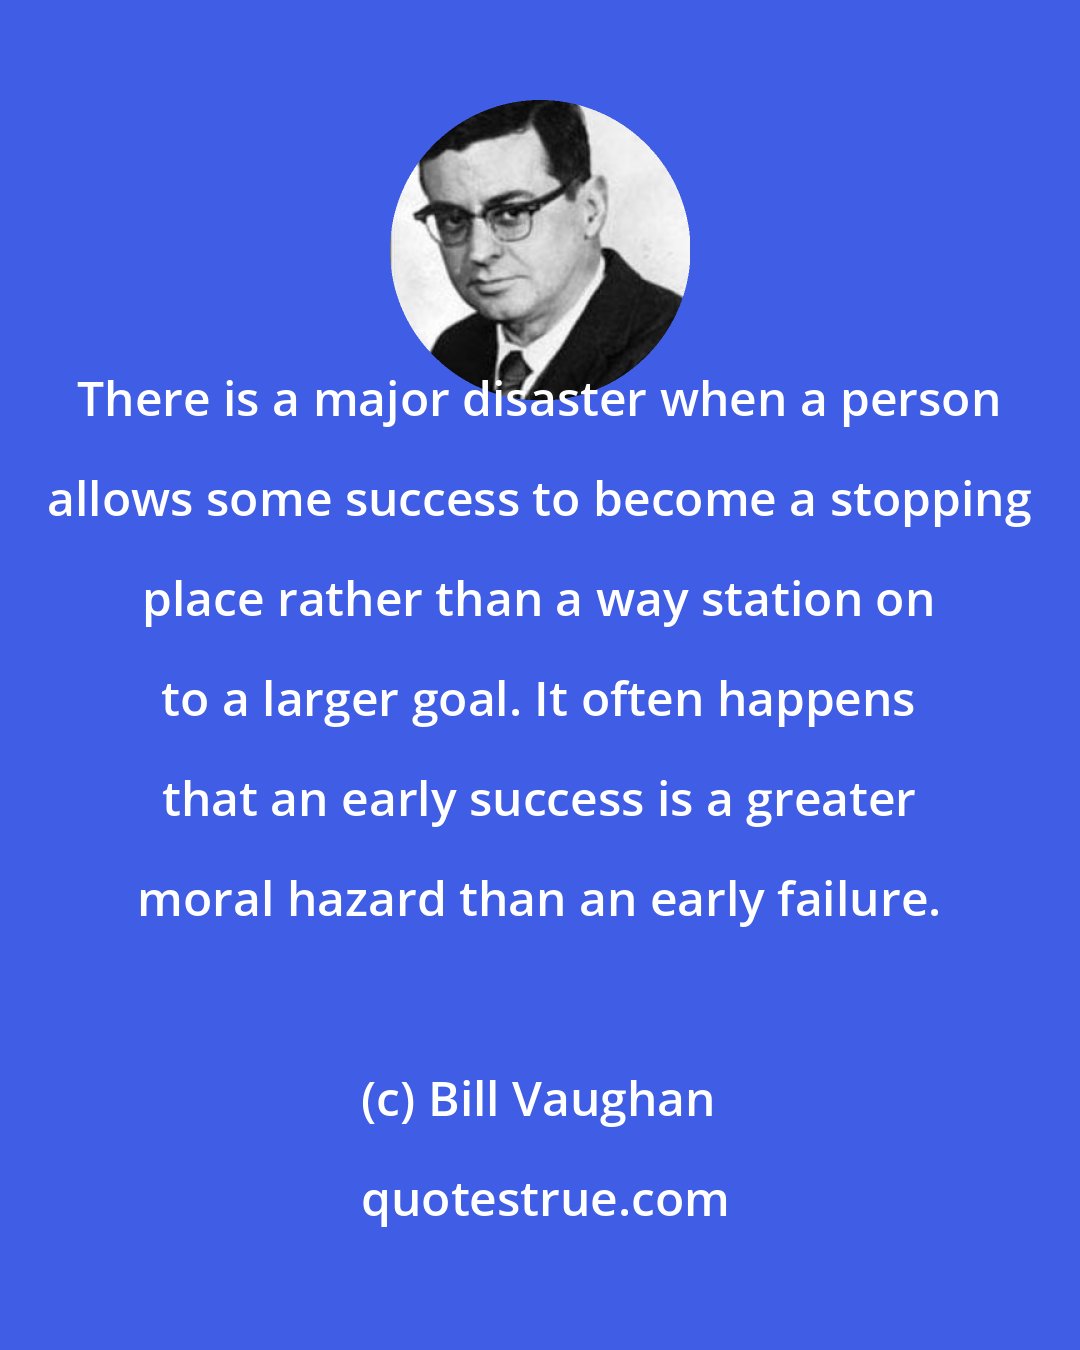 Bill Vaughan: There is a major disaster when a person allows some success to become a stopping place rather than a way station on to a larger goal. It often happens that an early success is a greater moral hazard than an early failure.